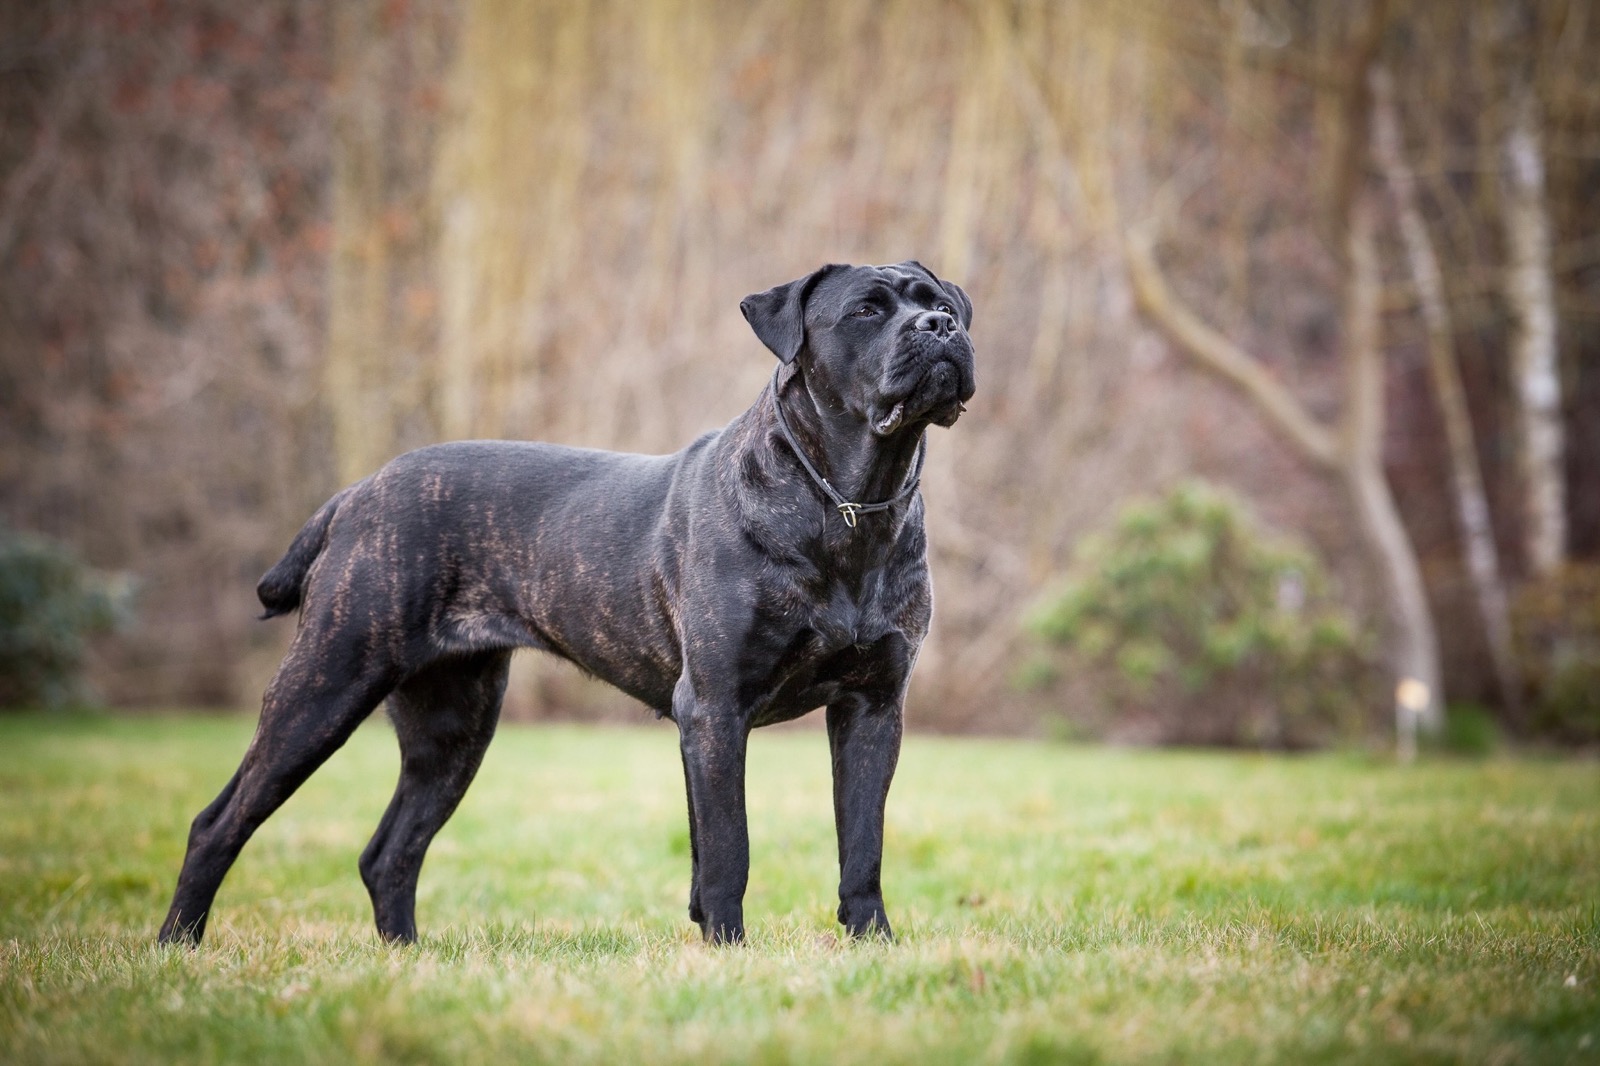 7 in 10 People Can’t Identity More Than 15 of These Dog Breeds 🐕 — Let’s See If You Can Do It Cane Corso